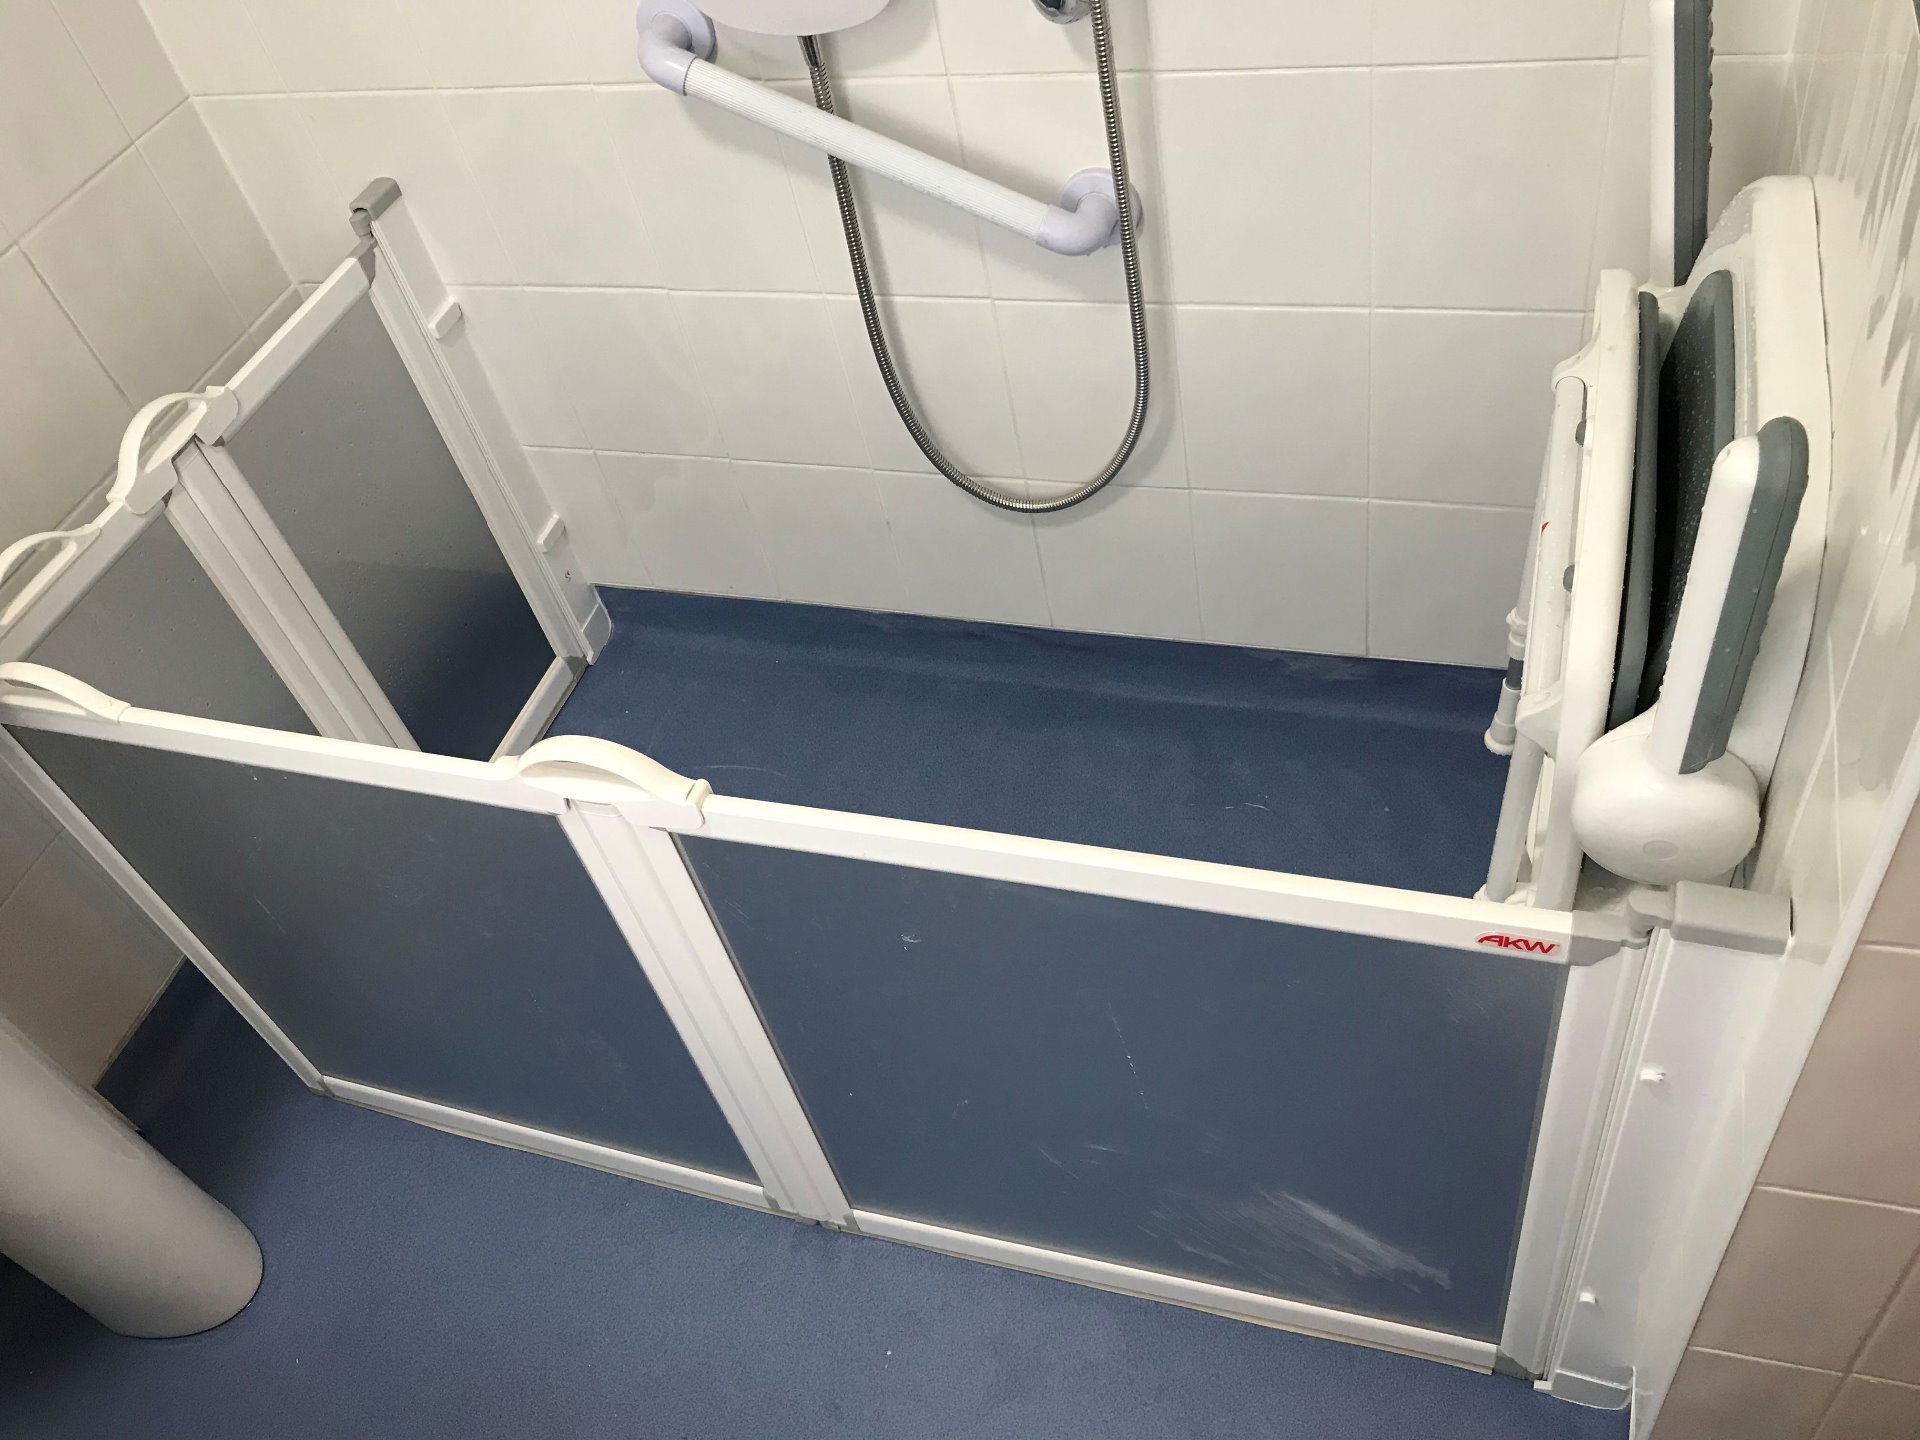 Level access shower area with a fold down seat and carer screens when required, Barnstaple North Devon